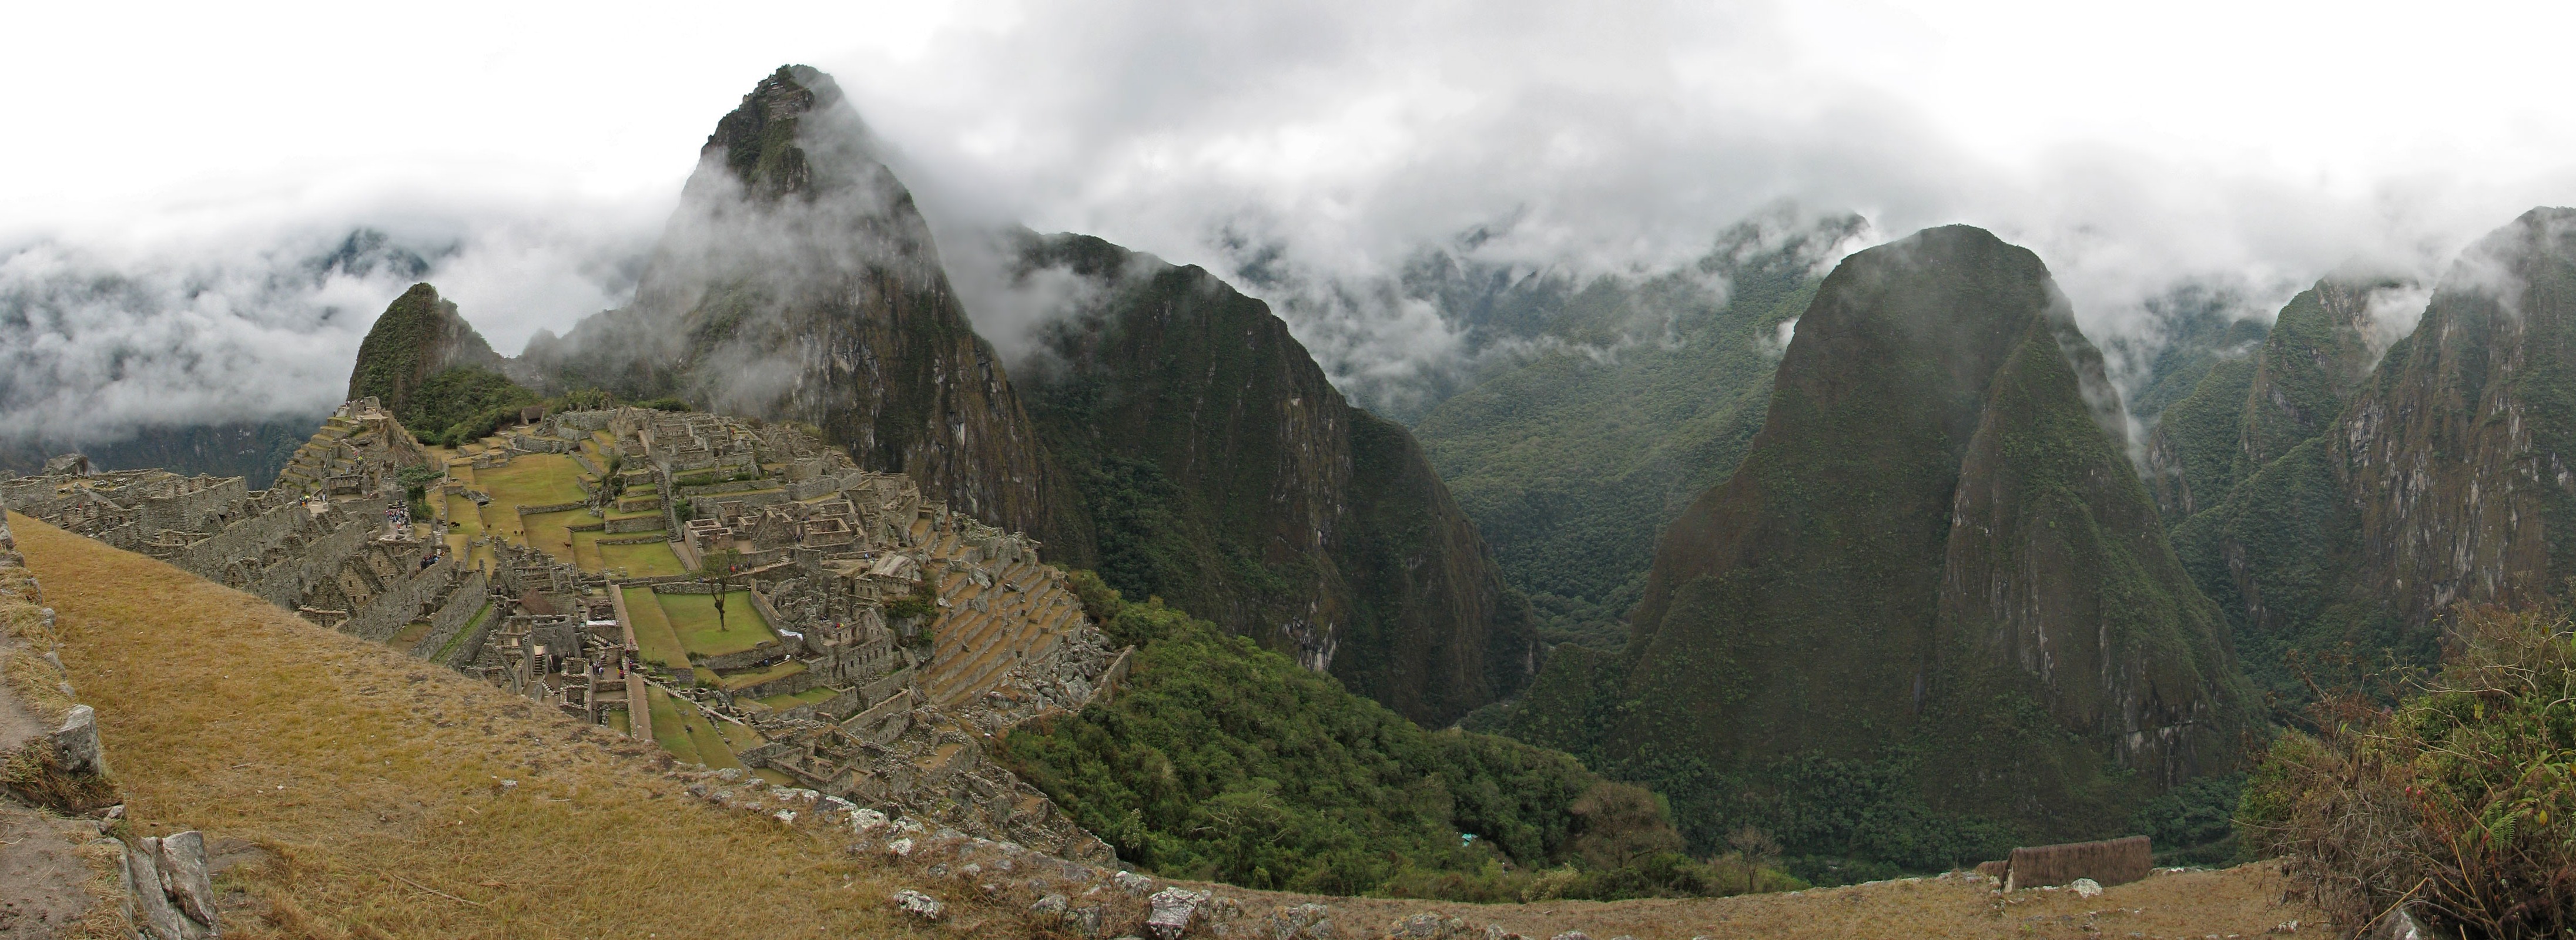 Panoramic Image of Machu Picchu and the Sacred Valley